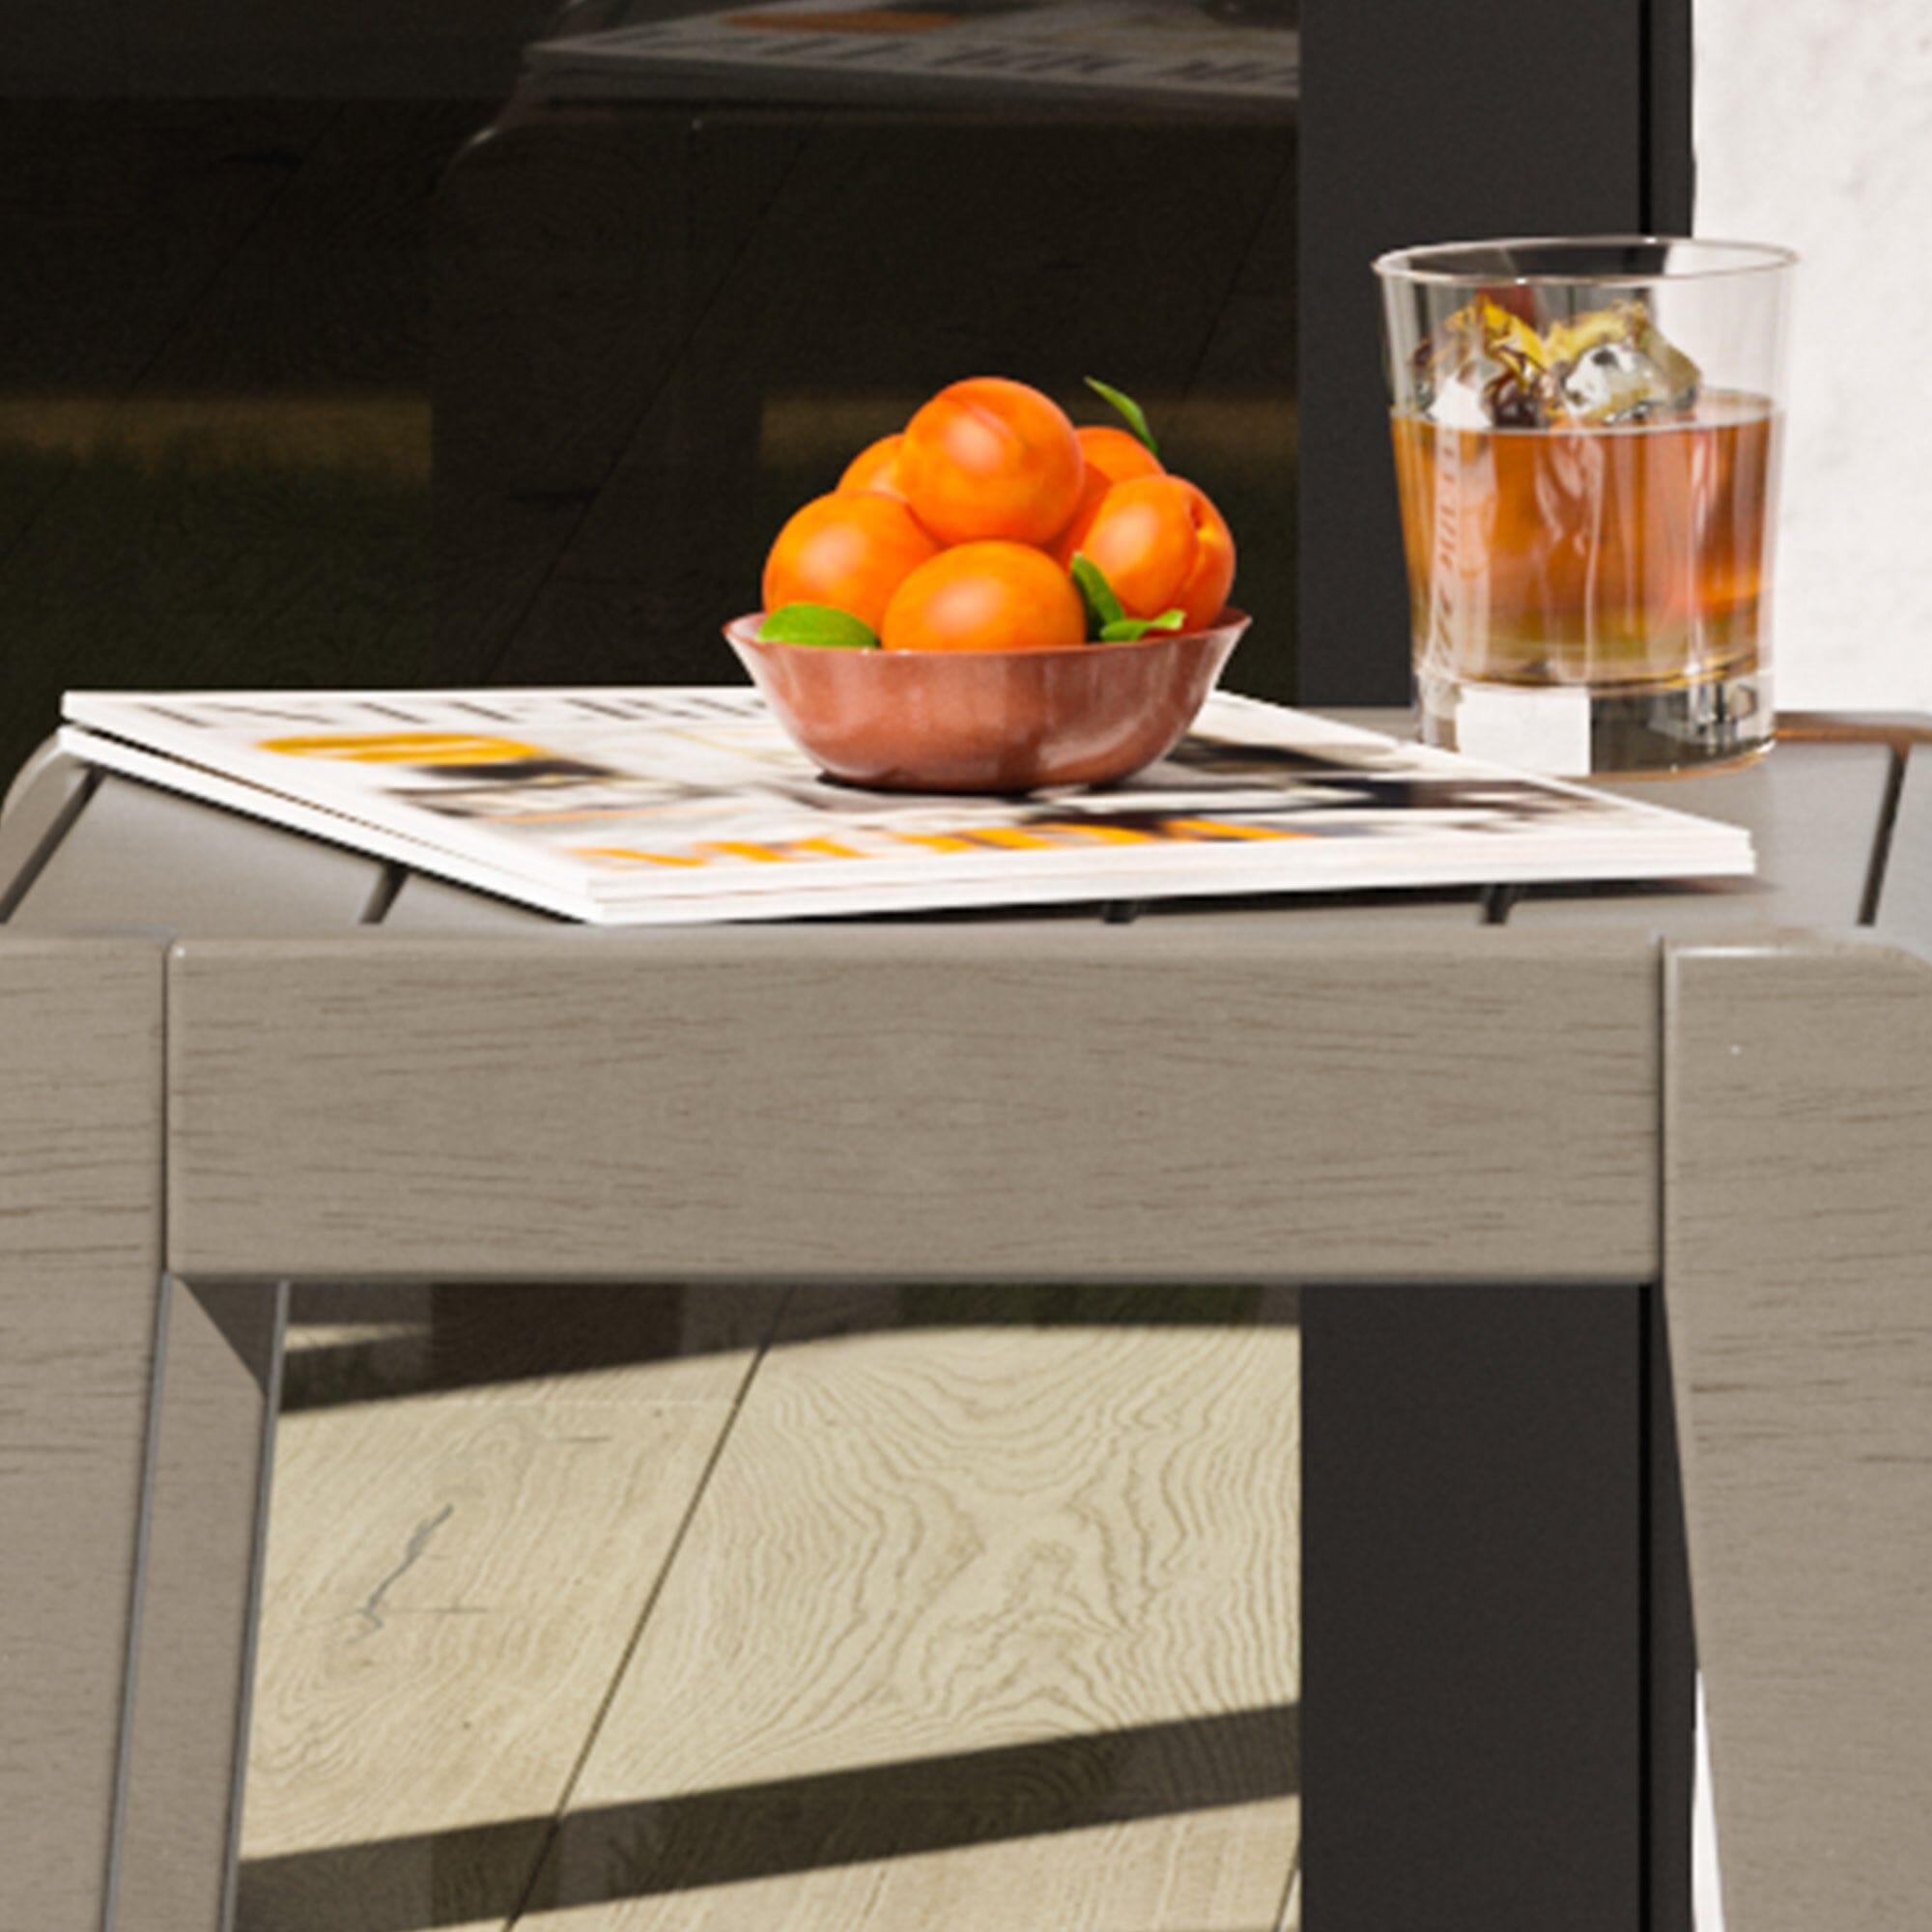 Transitional Outdoor End Table By Sustain Outdoor Dining Table Sustain